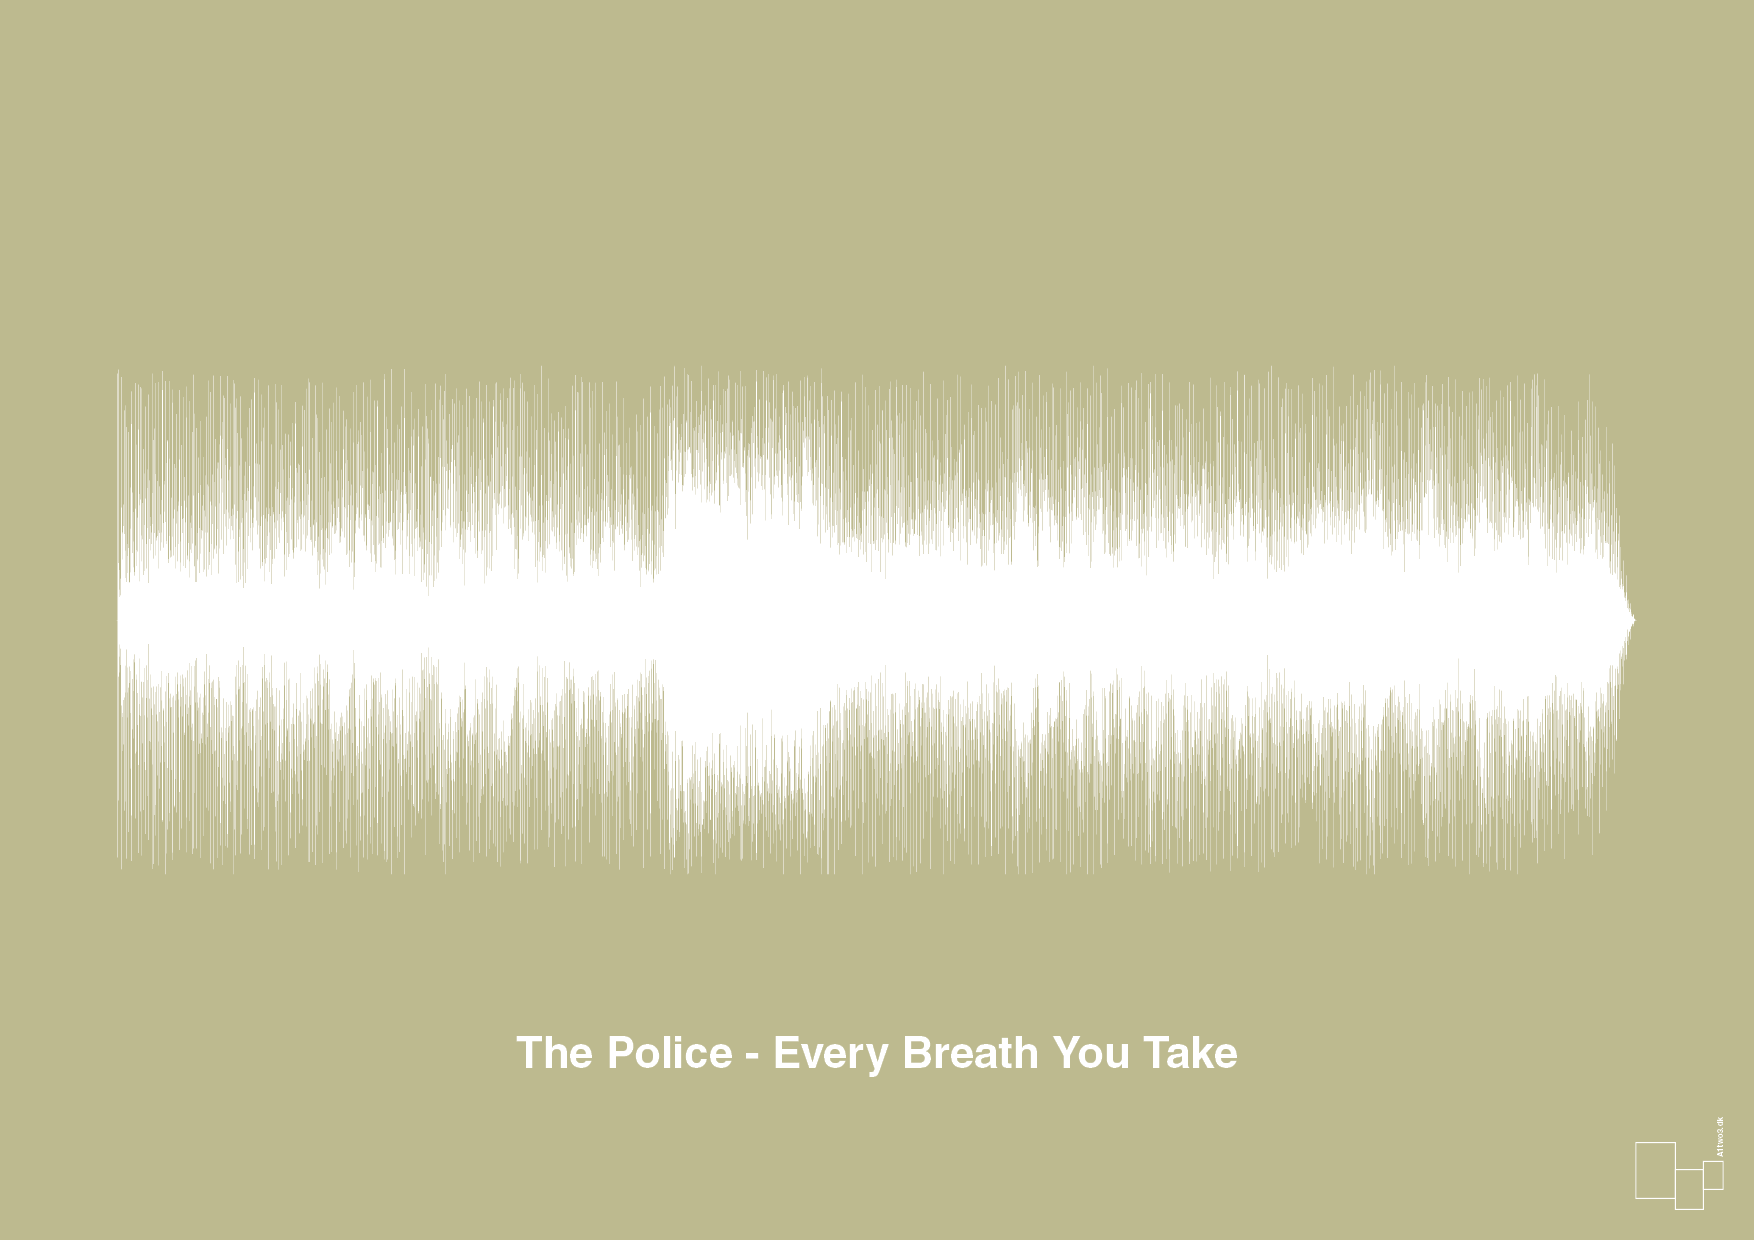 the police - every breath you take - Plakat med Musik i Back to Nature